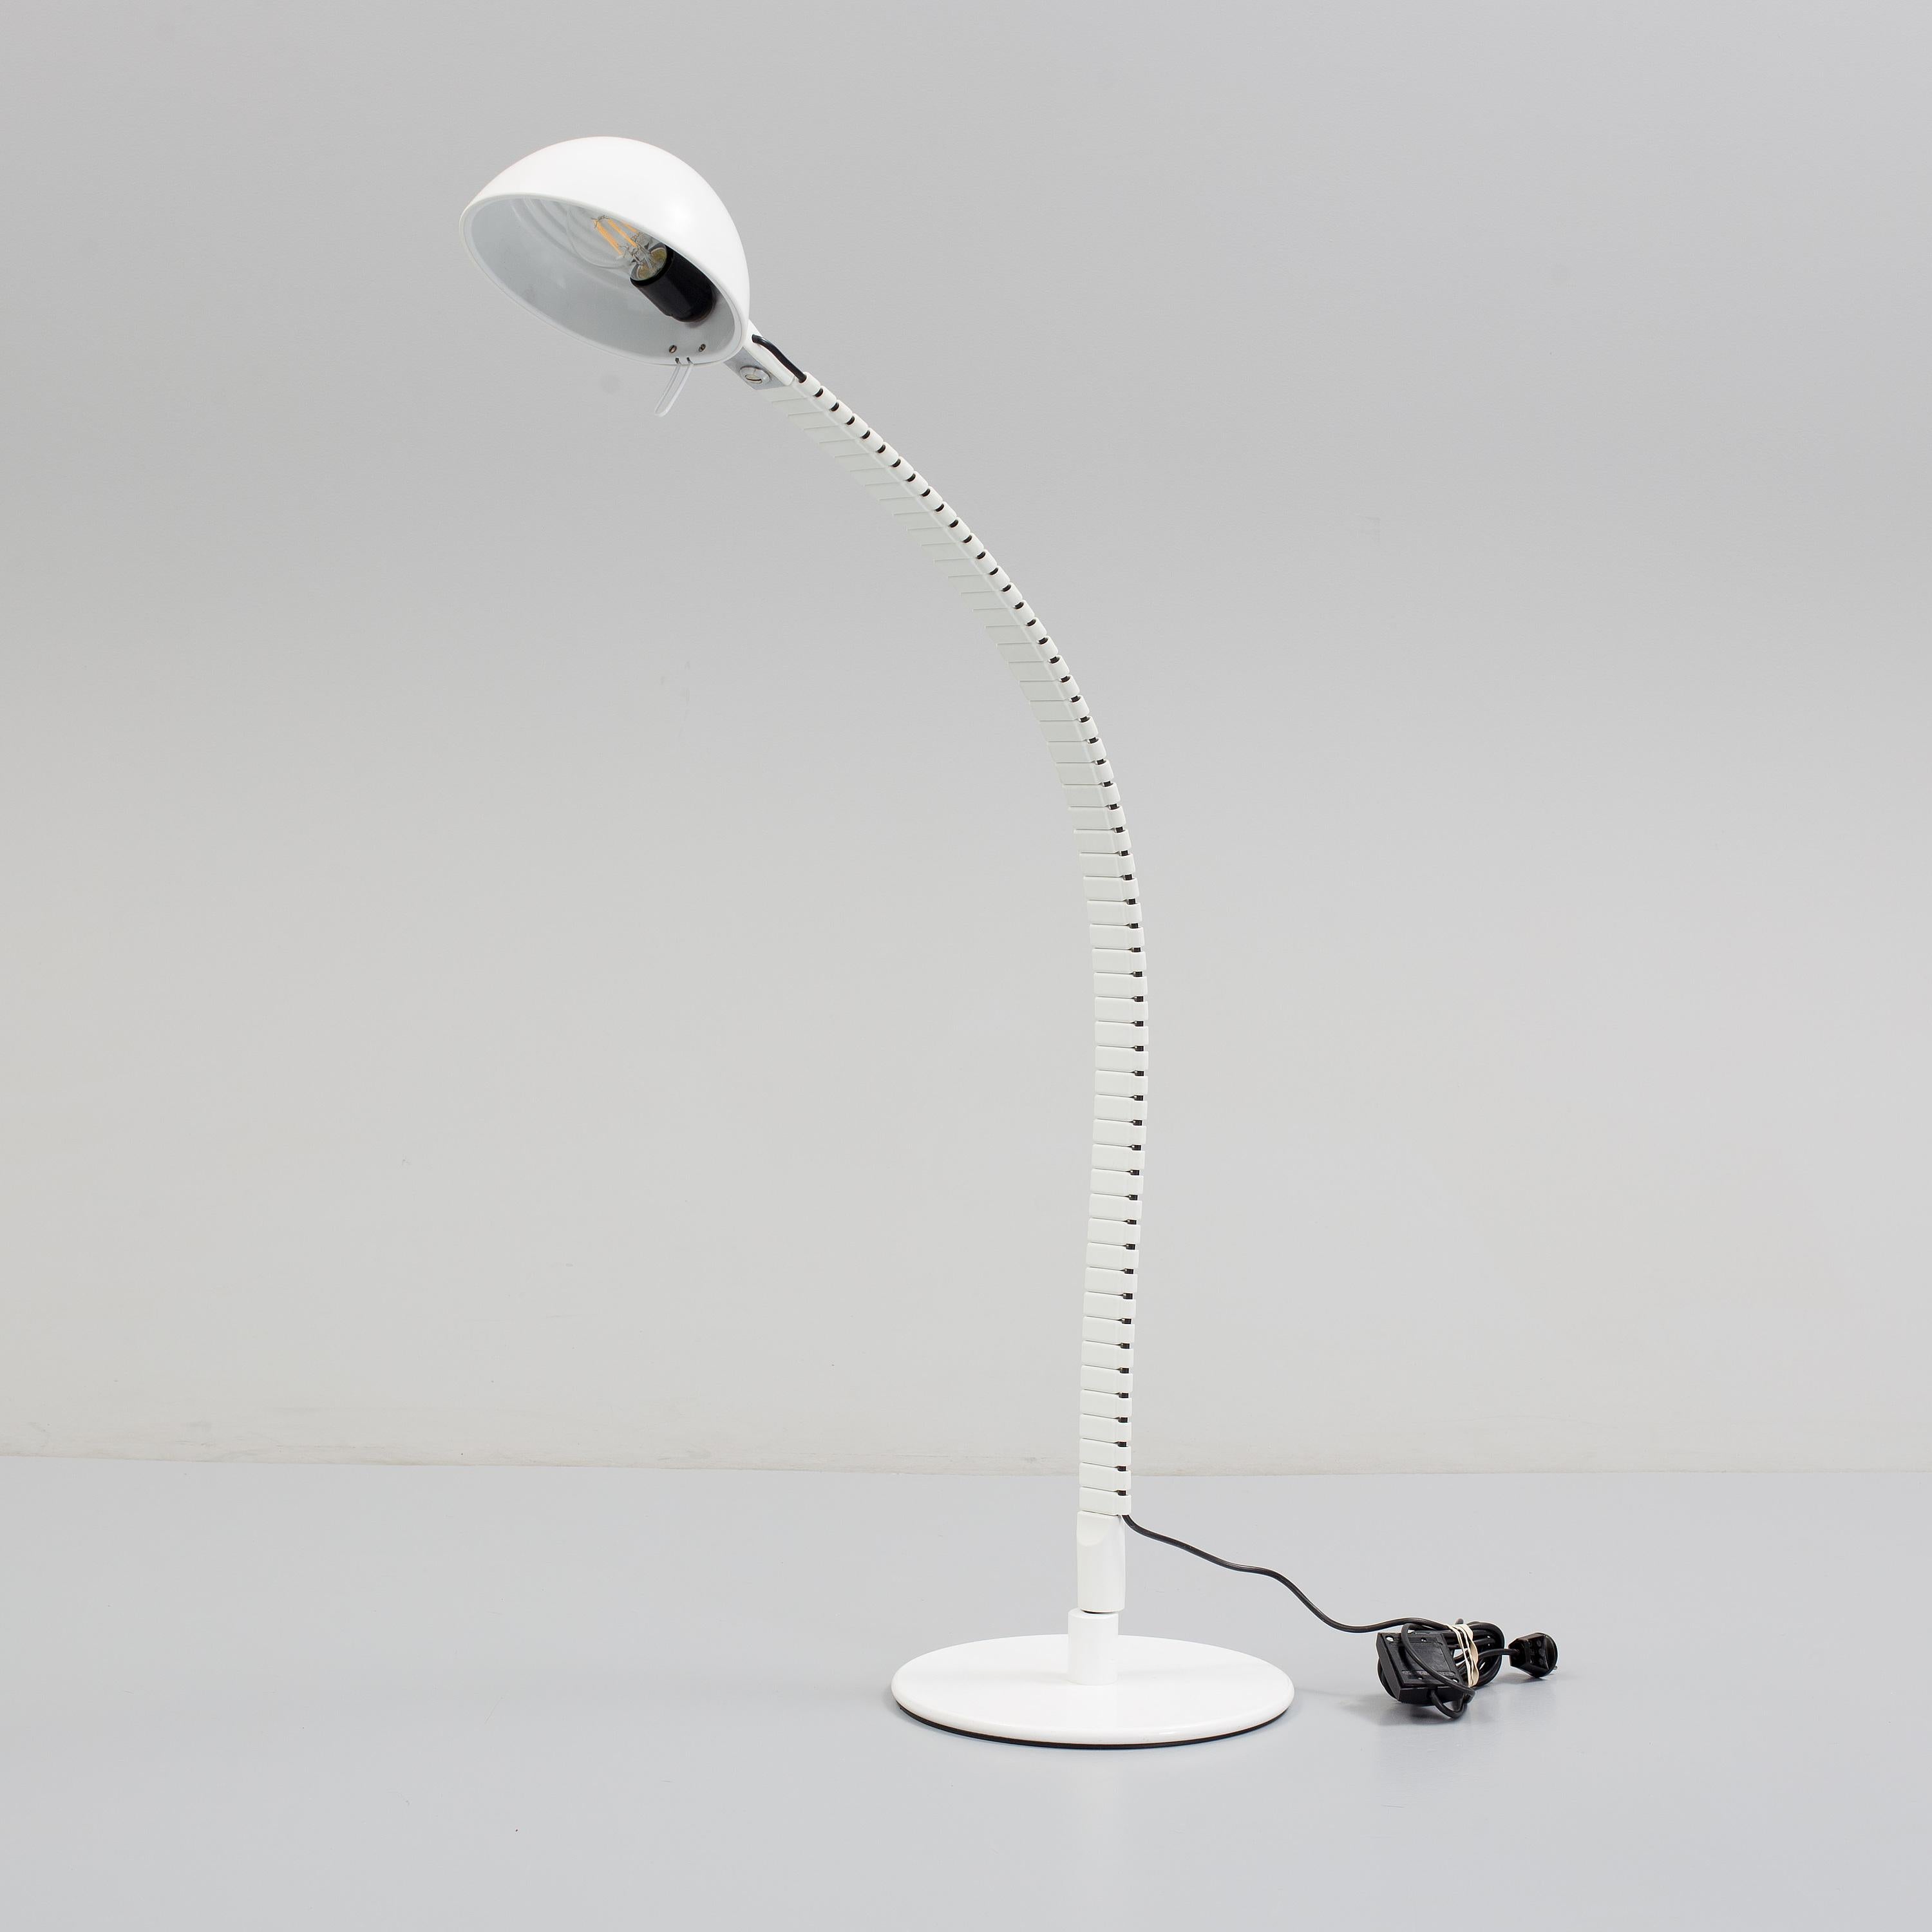 1980s Postmodern Vertebrae floor lamp by Elio Martinelli
Flex floor lamp, also known as Vertebrae, Model 2164 by Elio Martinelli for Martinelli Luce.
The lamp is full flexible with swivel shade.
Organic shape of the flexible arm is similar to a